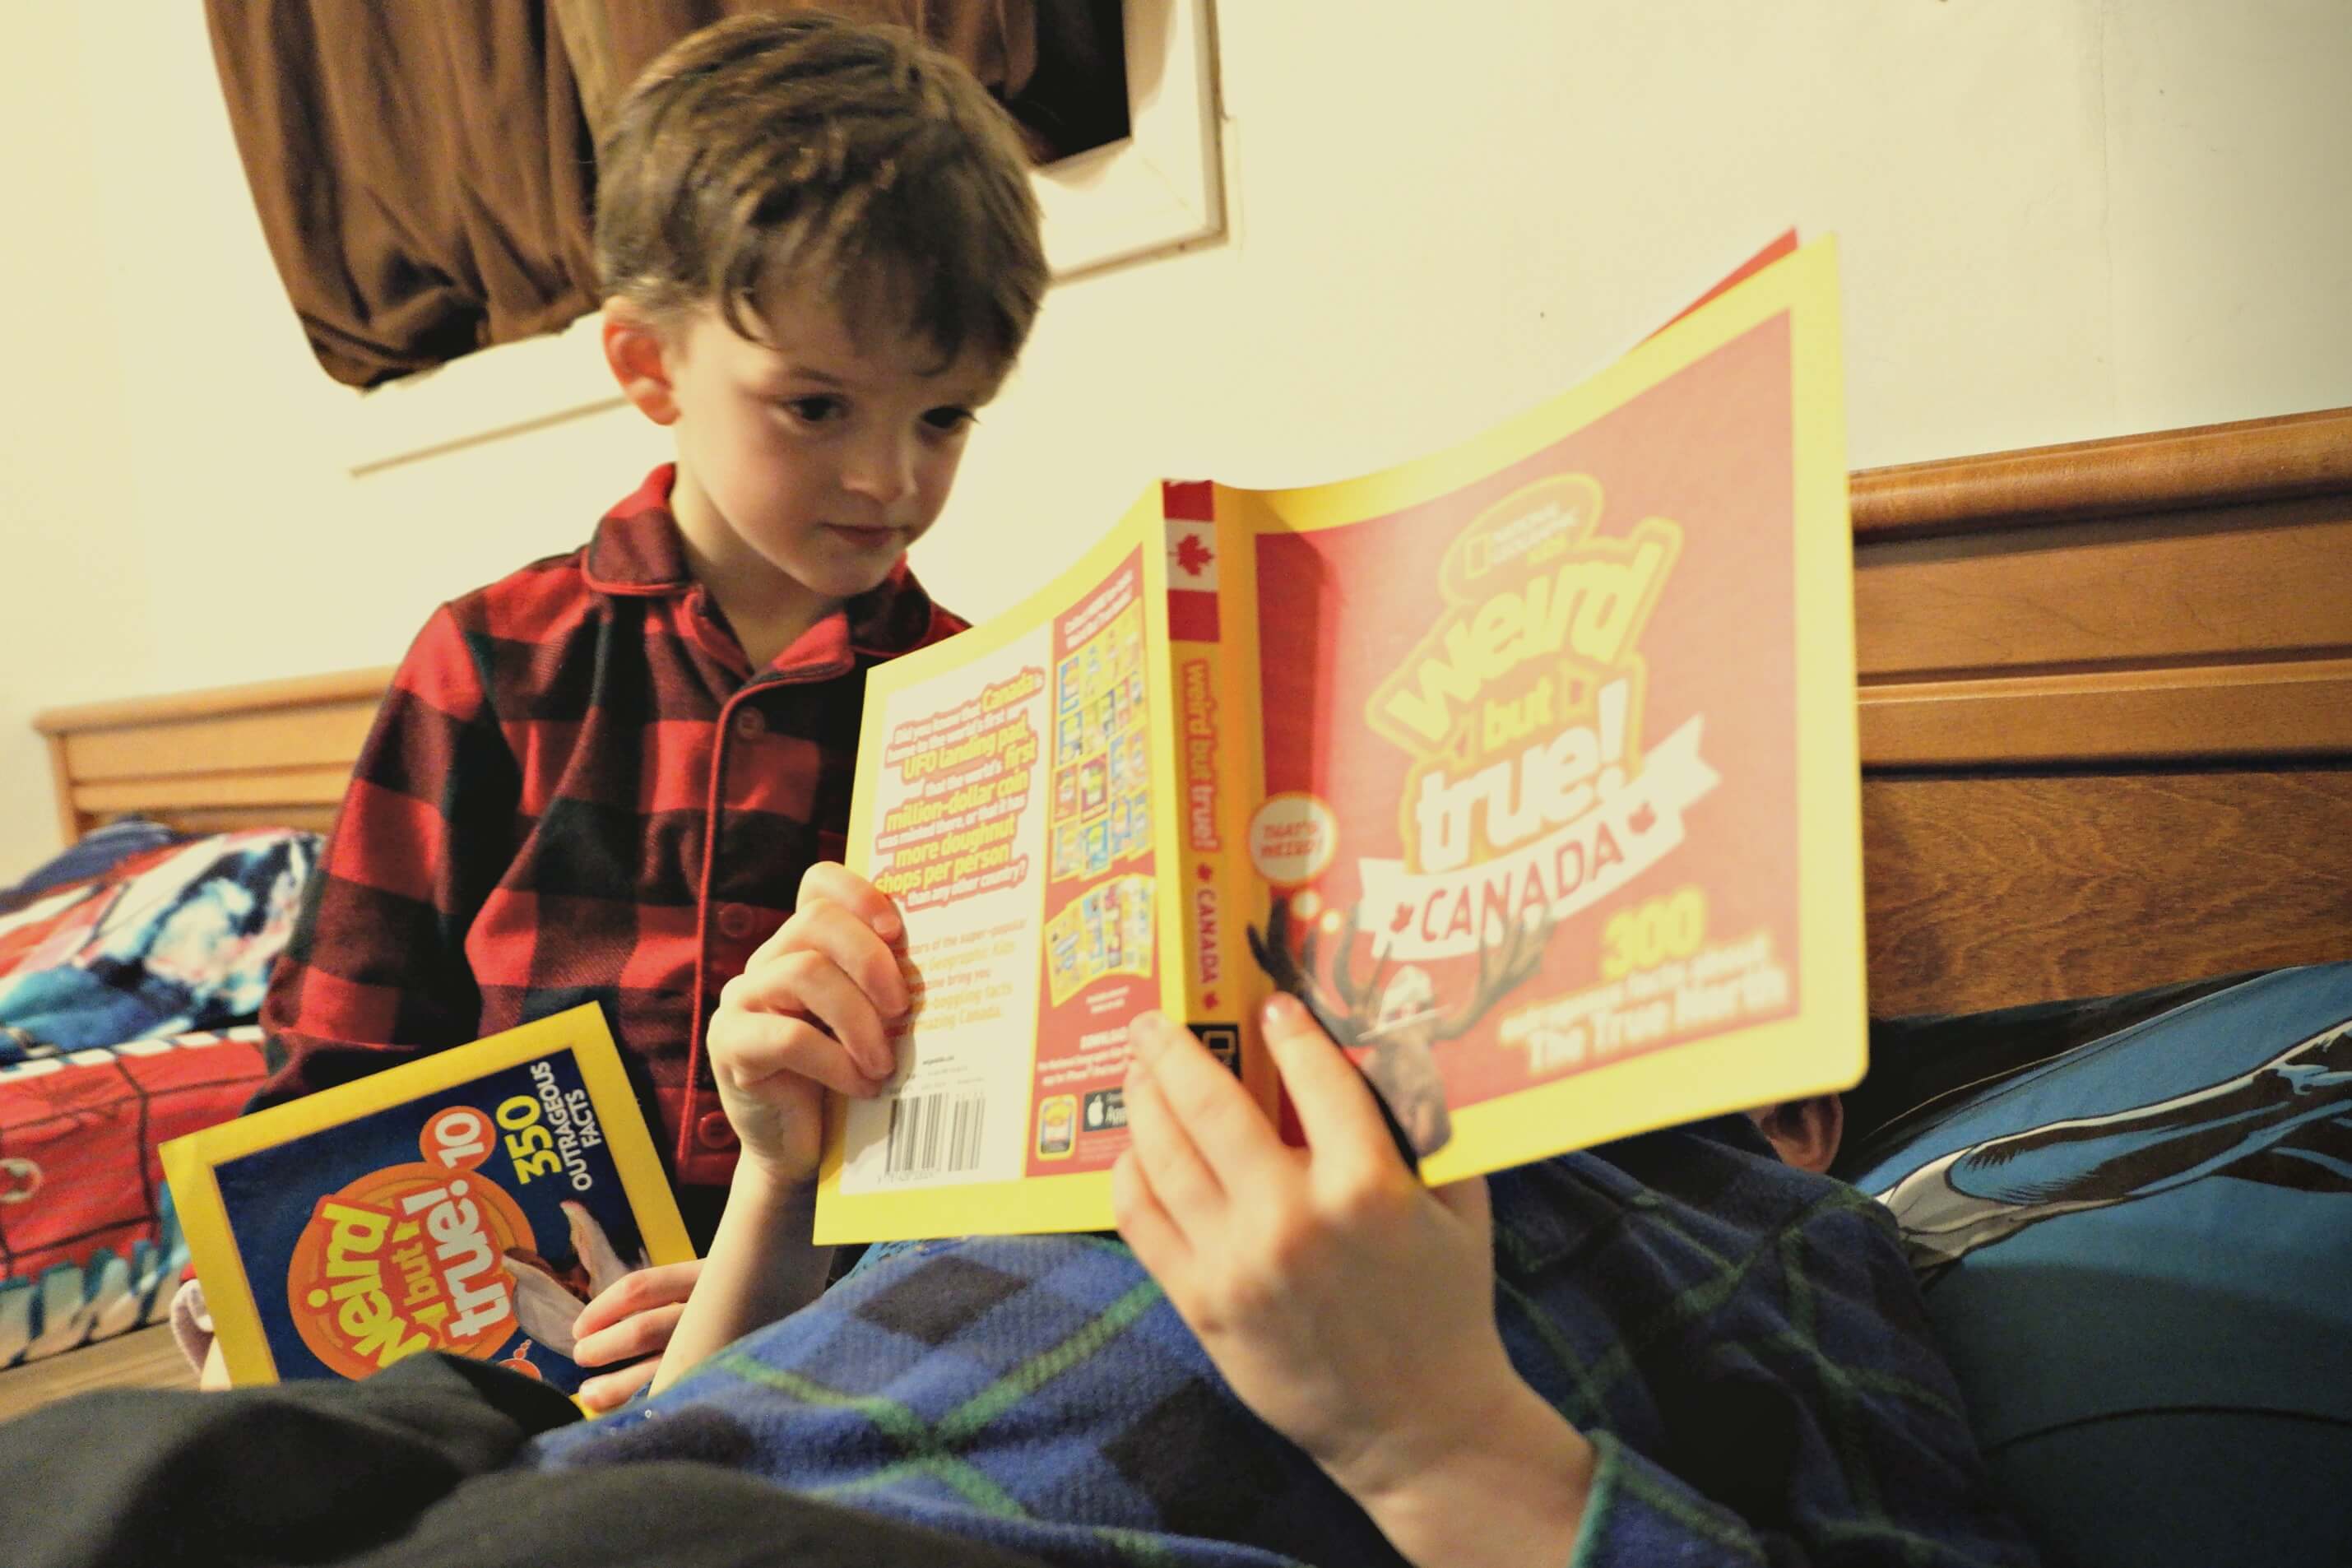 brothers reading together national geographic canada facts book weird but true bedtime reading brother kindergarten pickle planet